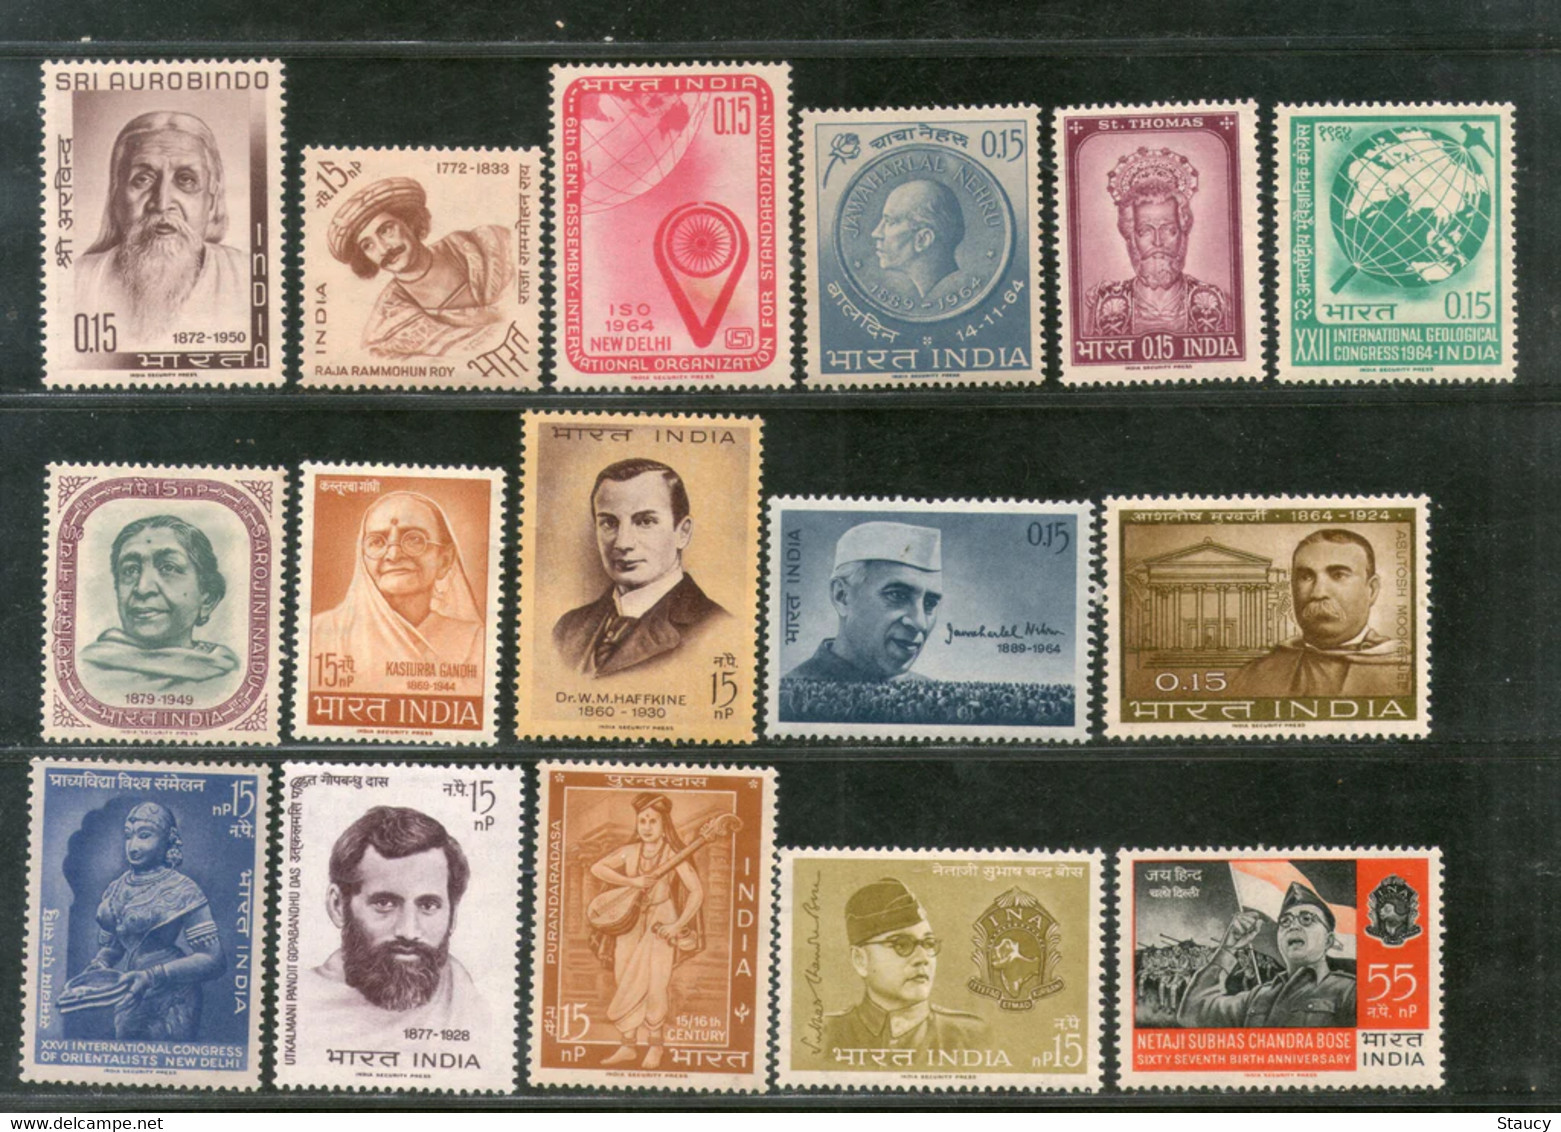 India 1964 Complete Year Pack / Set / Collection Total 16 Stamps (No Missing) MNH As Per Scan - Nuovi